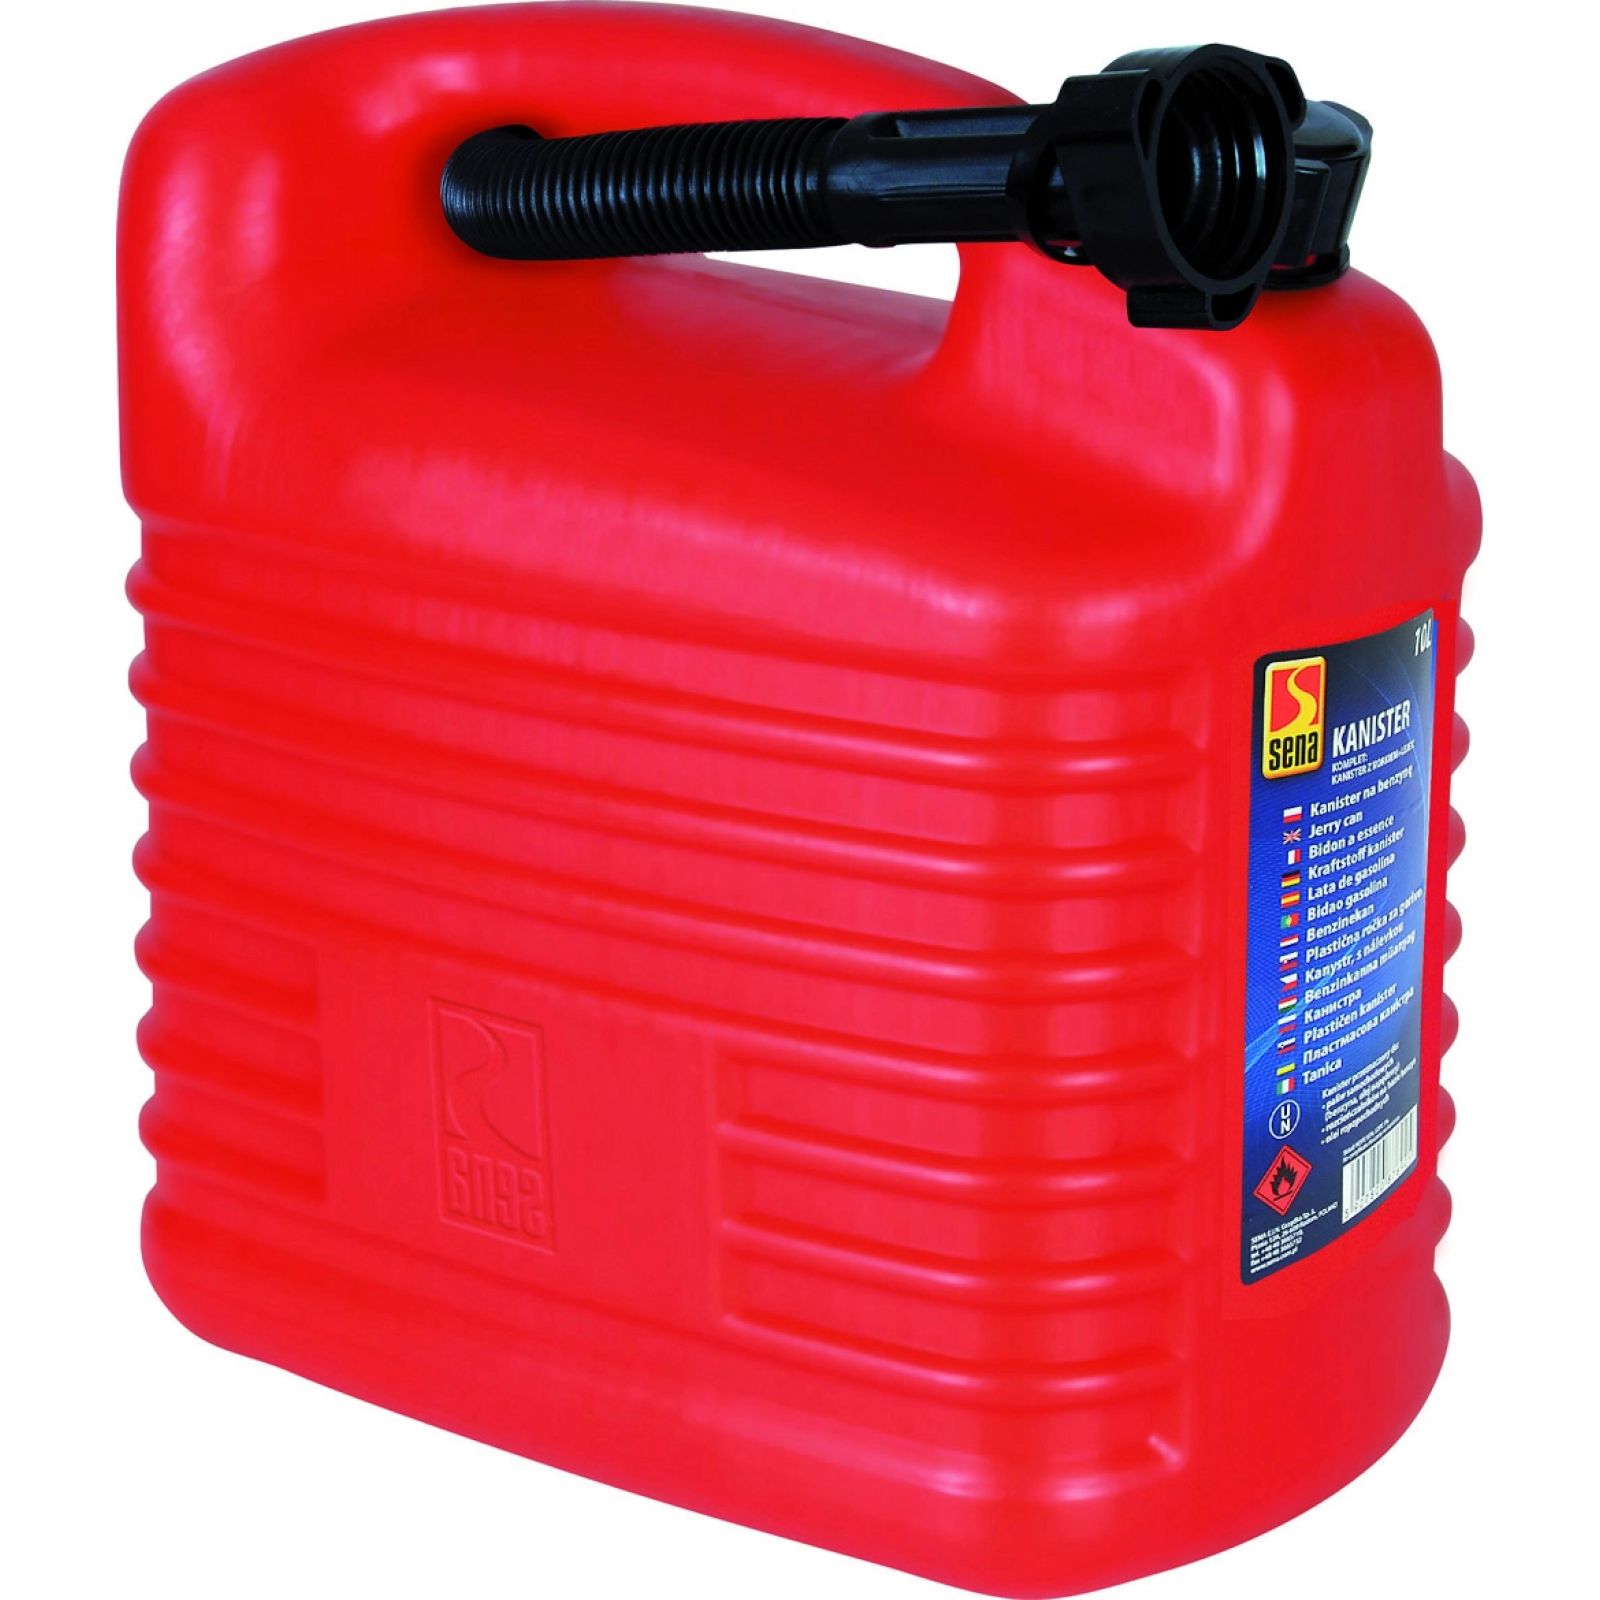 https://www.autoteile-store.at/img/product/benzinkanister-kraftstoffkanister-premium-un-geprueft-10l-6925red-90/c97e192ef0f808af3cf313ee07ca14a7_1600.jpg